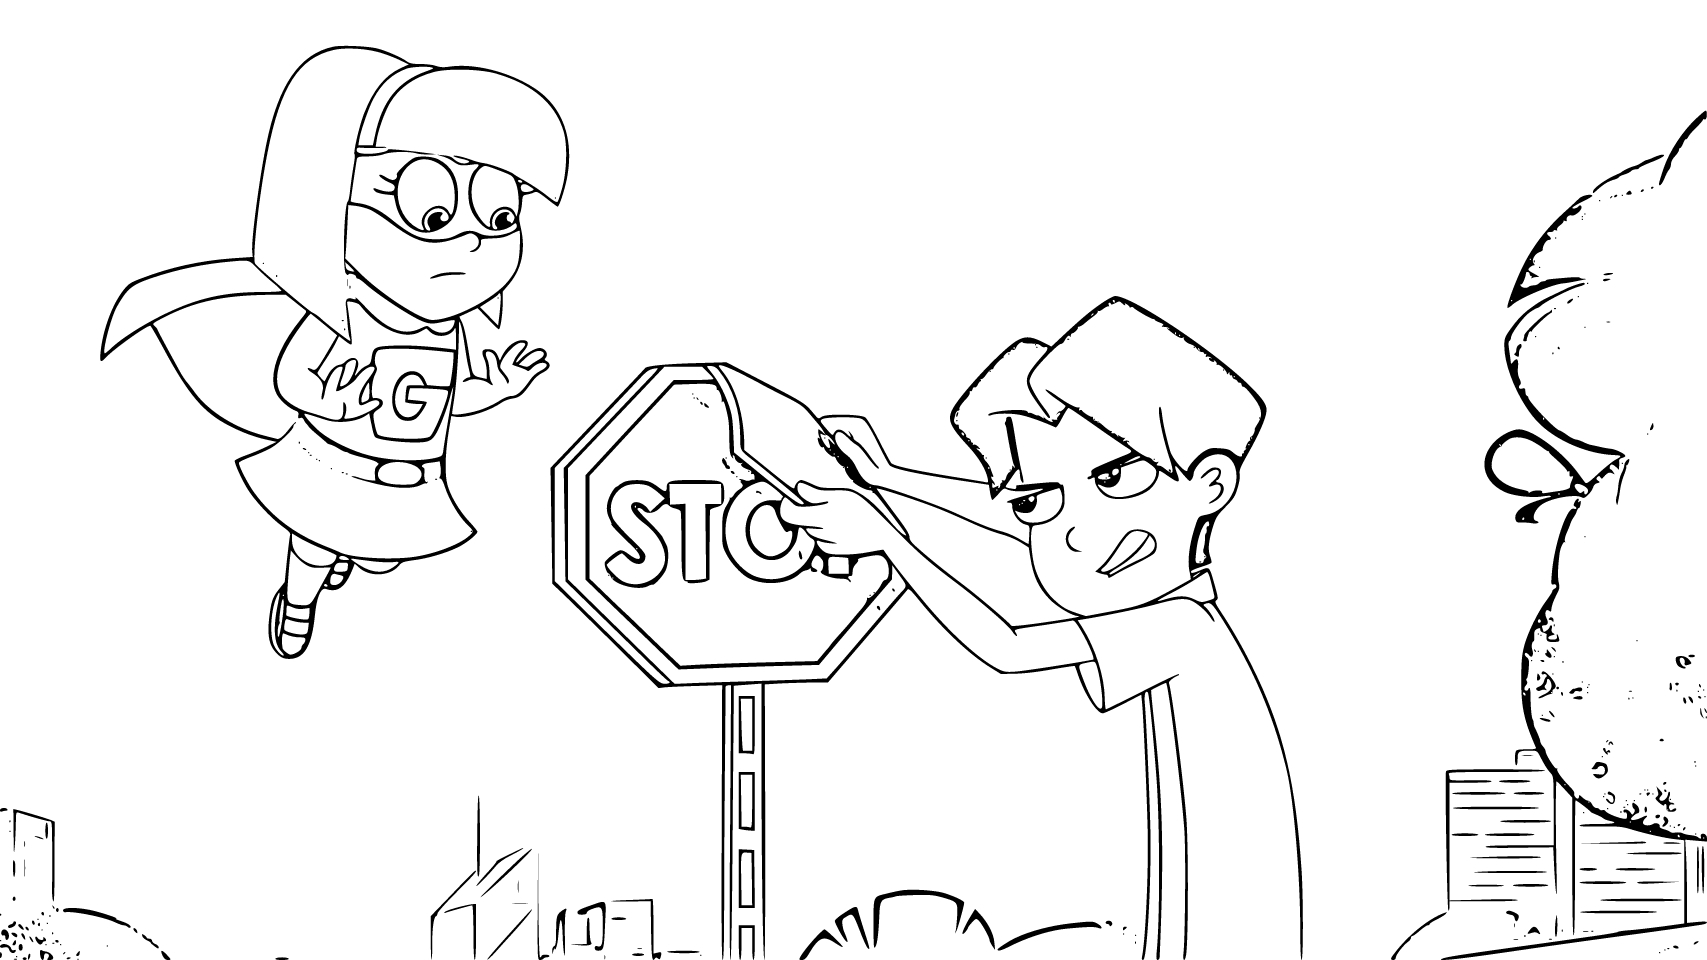 Printable Gretel, Kevin and Stop Sign Coloring Page for kids.